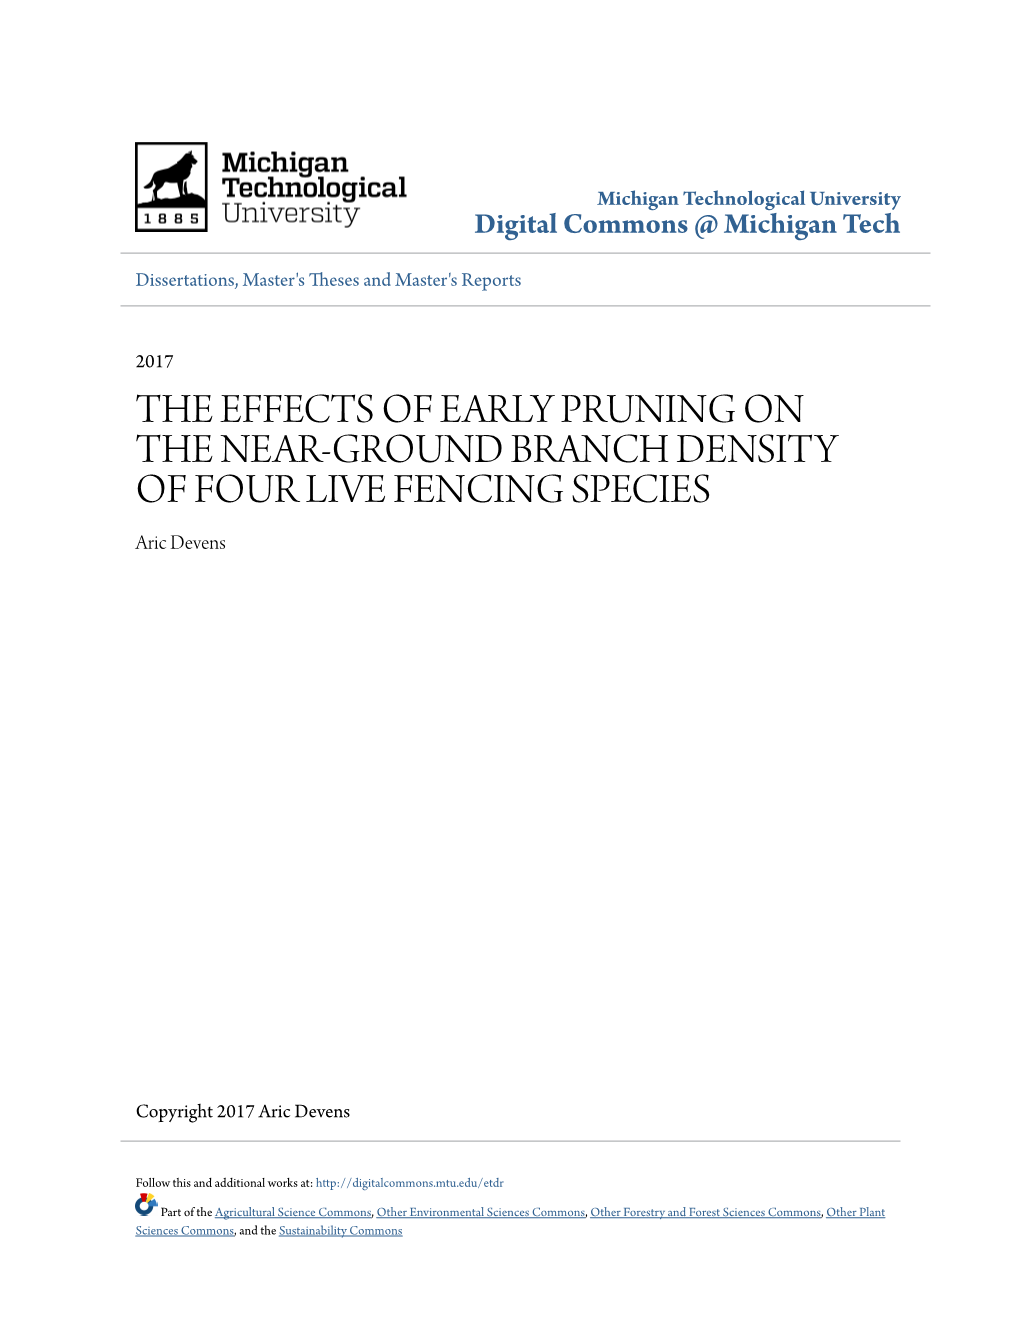 THE EFFECTS of EARLY PRUNING on the NEAR-GROUND BRANCH DENSITY of FOUR LIVE FENCING SPECIES Aric Devens